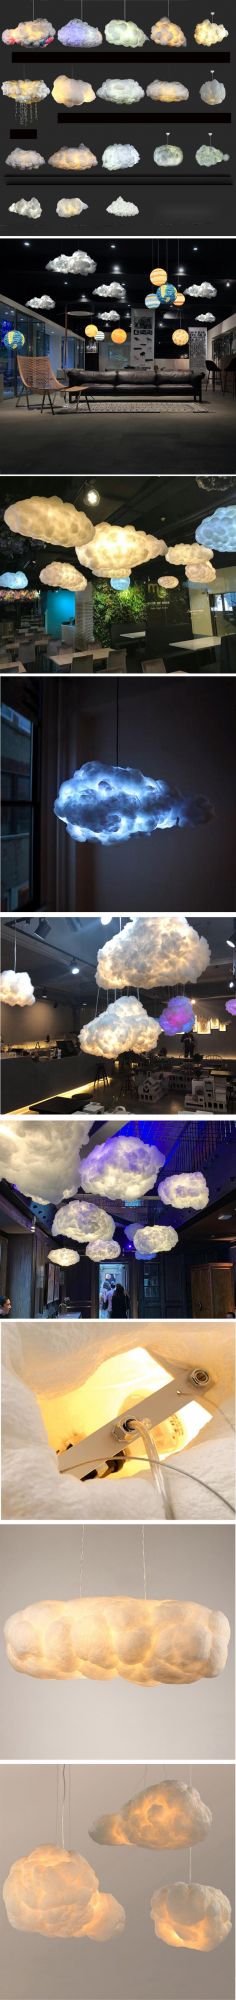 Romantic Creative White Floating Clouds Shape Chandeliers Ceiling Decor Lamp for Home Children Room Wedding LED Pendant Lamp